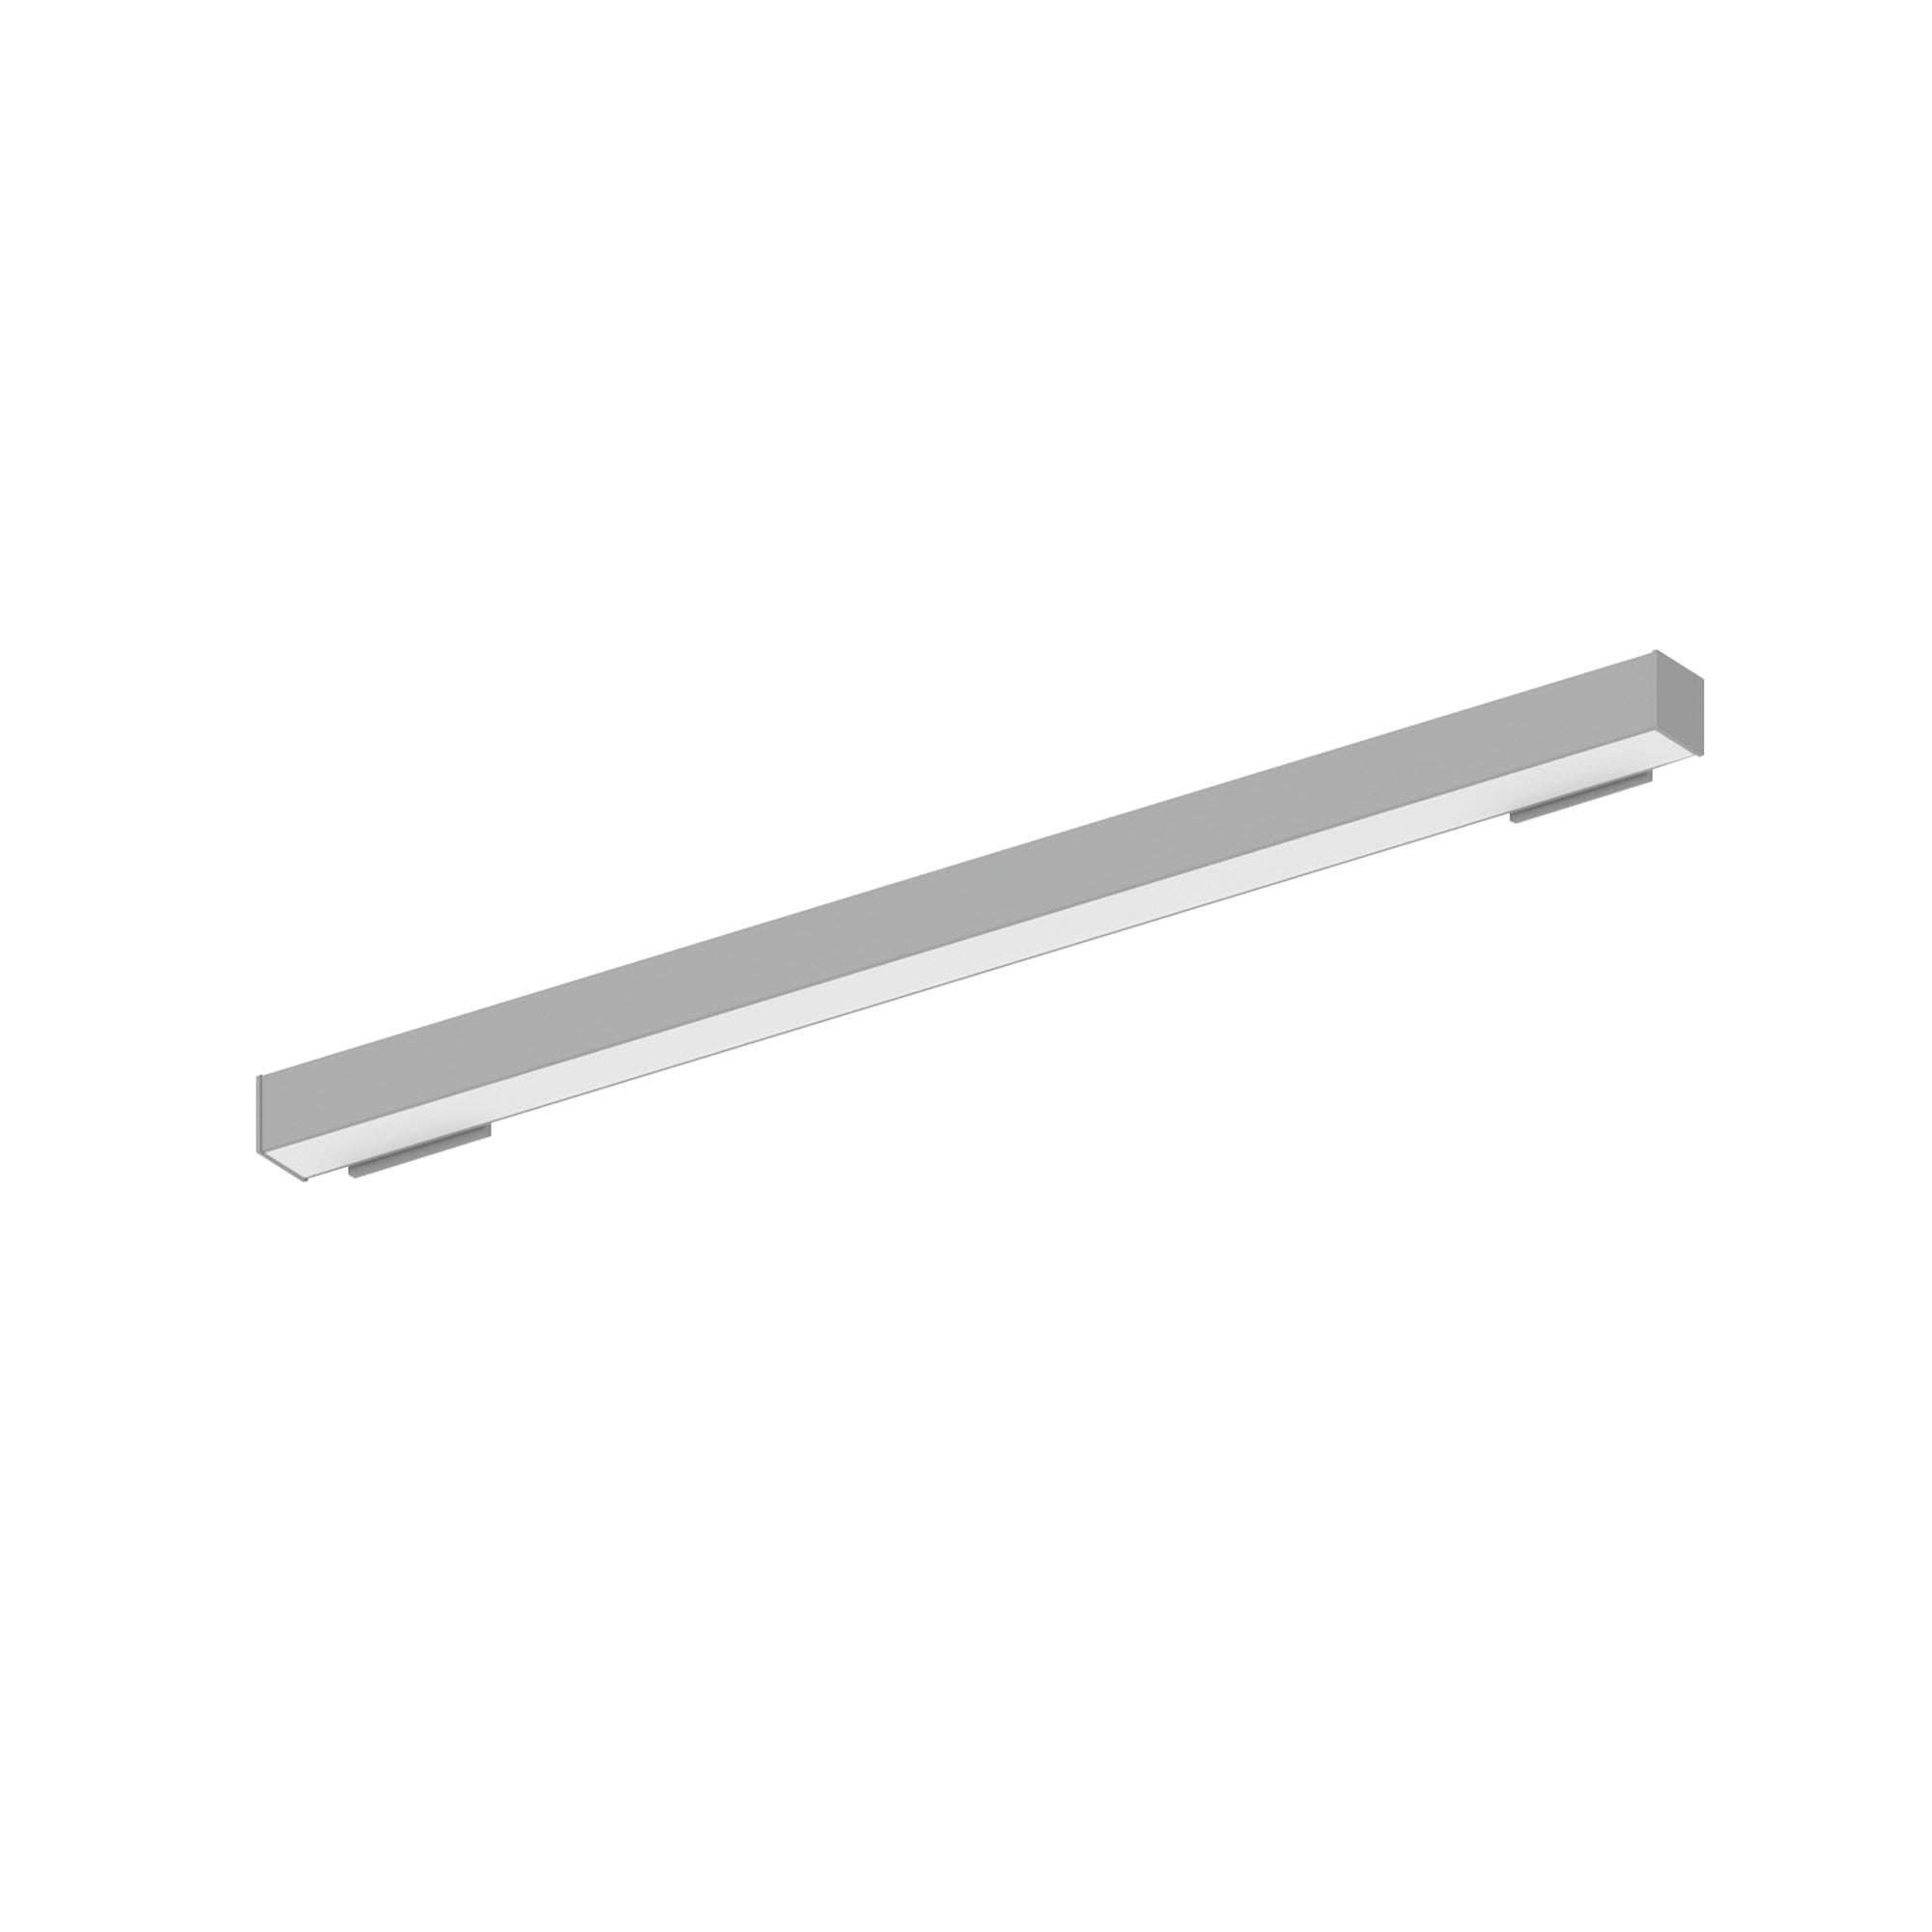 Nora Lighting NWLIN-41030A/L2-R2P - Linear - 4' L-Line LED Wall Mount Linear, 4200lm / 3000K, 2 Inchx4 Inch Left Plate & 2 Inchx4 Inch Right Plate, Right Power Feed, Aluminum Finish